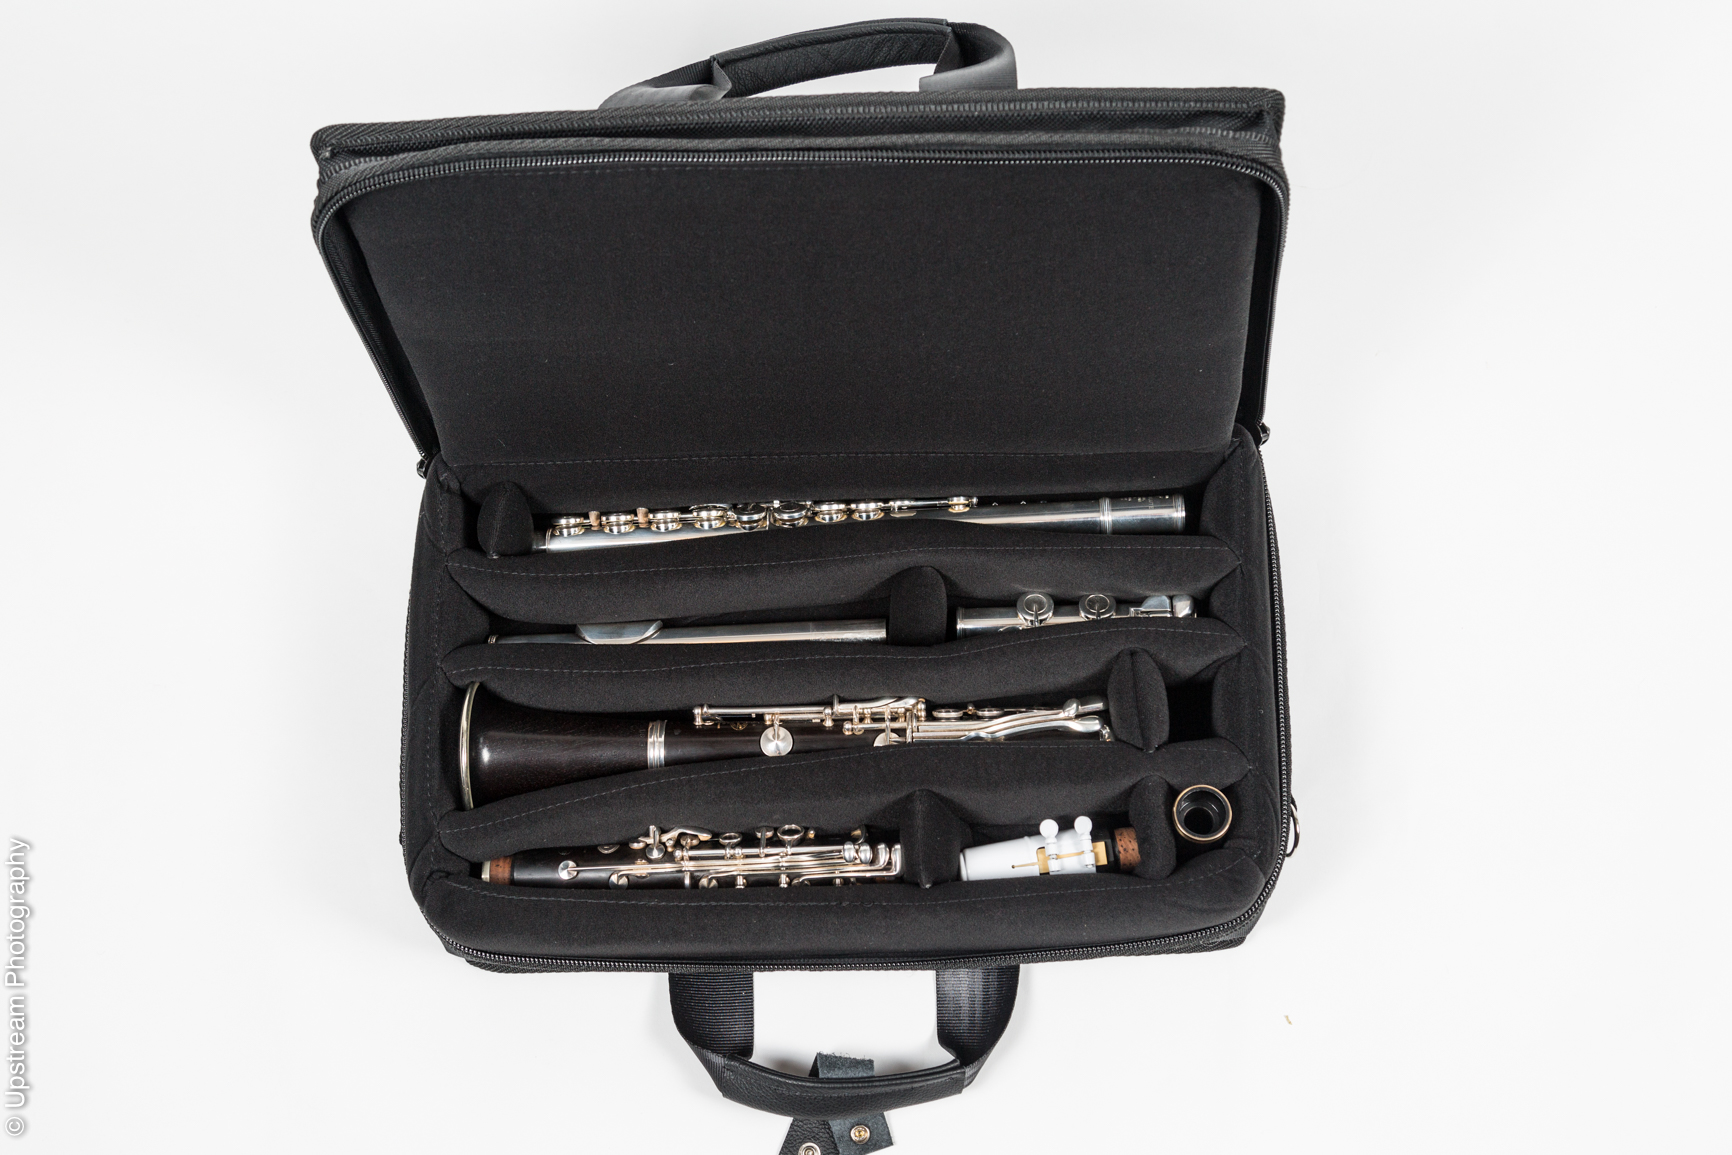 Clarinet case for sale-Double Case (shoulder) for Flute and 